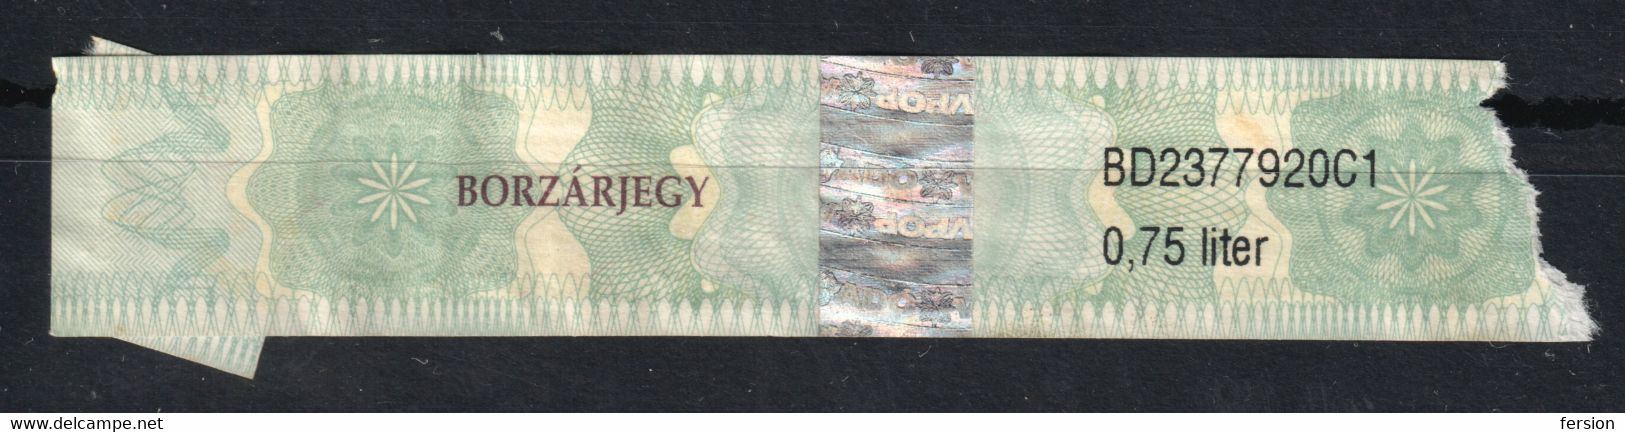 2000 Hungary - Wine Drink Alcohol - Customs Revenue Tax SEAL Stripe - Used - Hologram Holography - Steuermarken